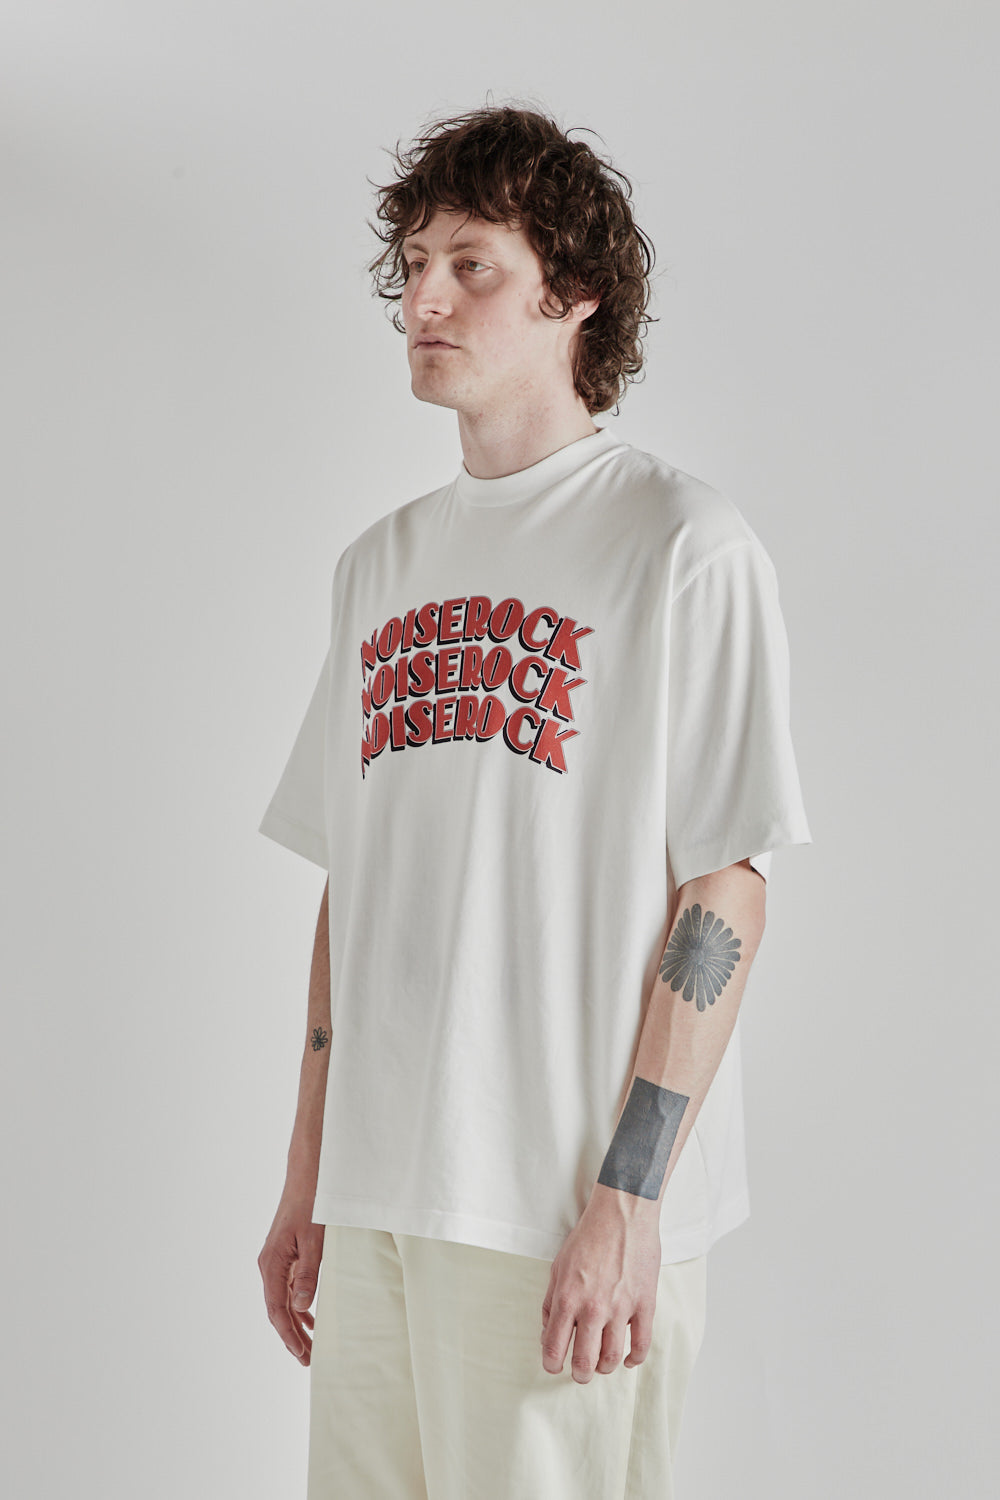 Blurhms Rootstock Noise Rock Print Wide Tee in White